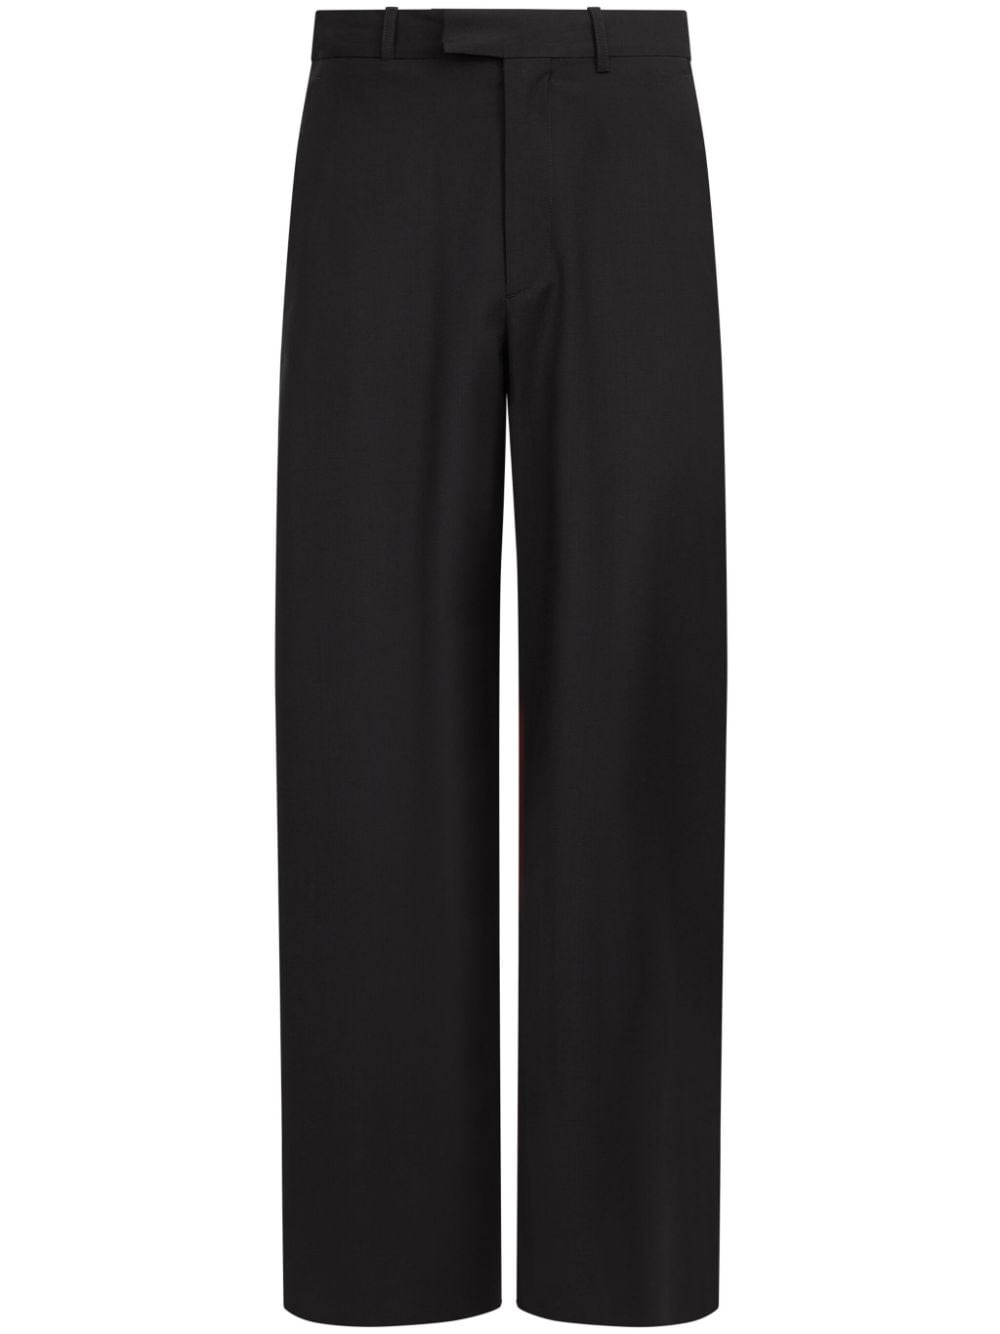 Paneled trousers